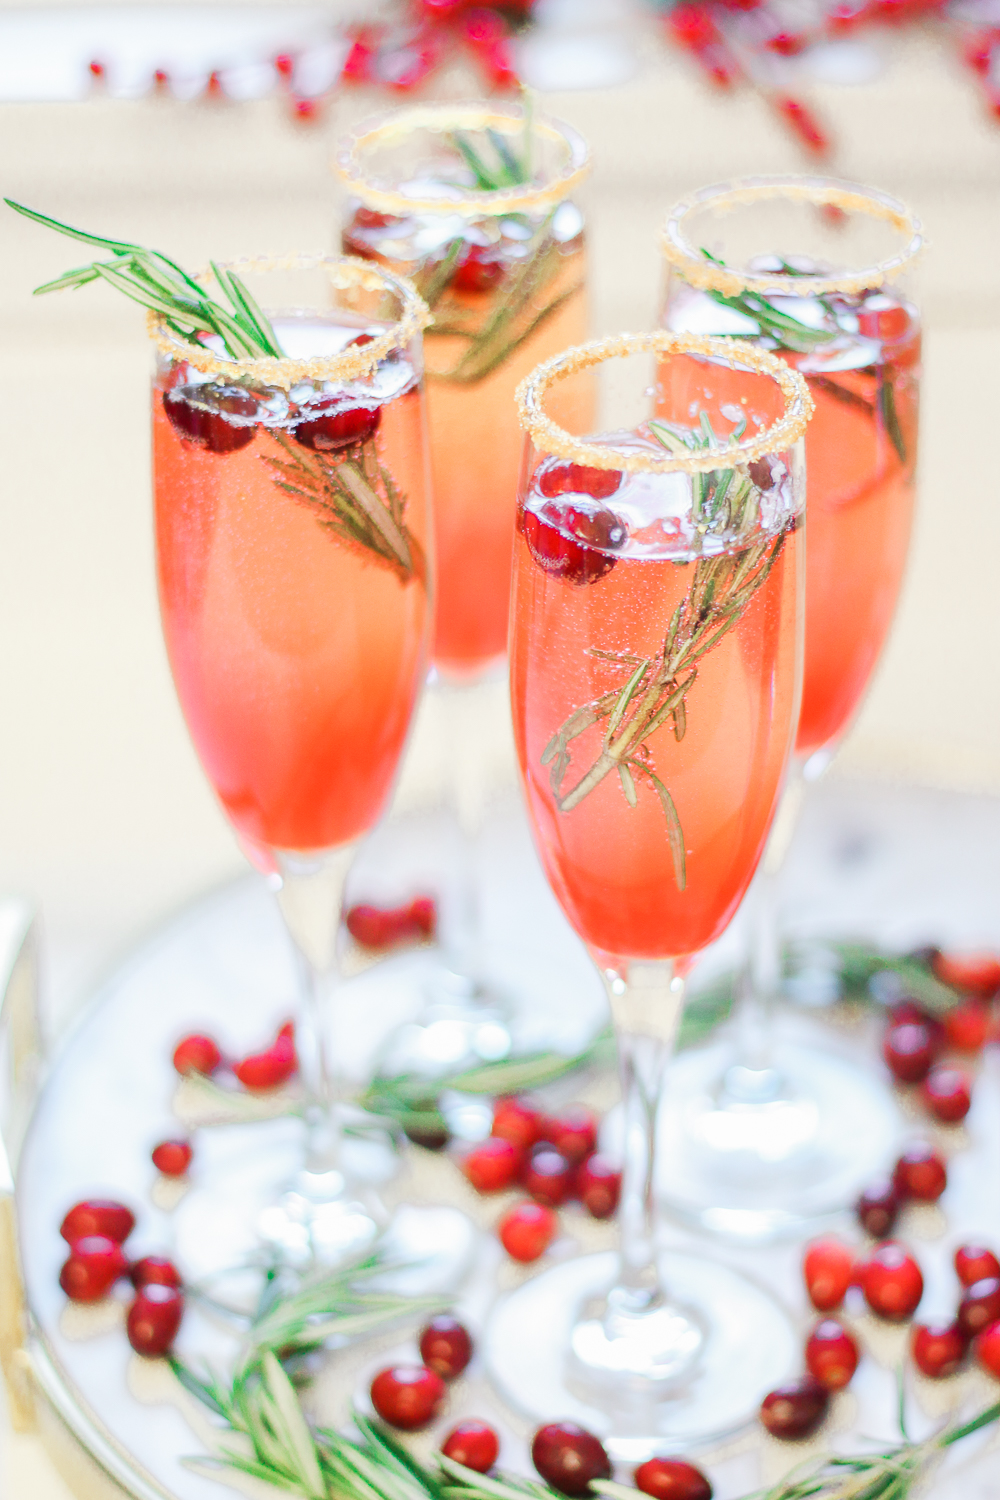 Ombré Cranberry Sparkler: A Cranberry Gin Cocktail for the Holidays by southern lifestyle blogger Stephanie Ziajka from Diary of a Debutante, Lunetta Prosecco review, fresh cranberry cocktail, red ombre cocktail